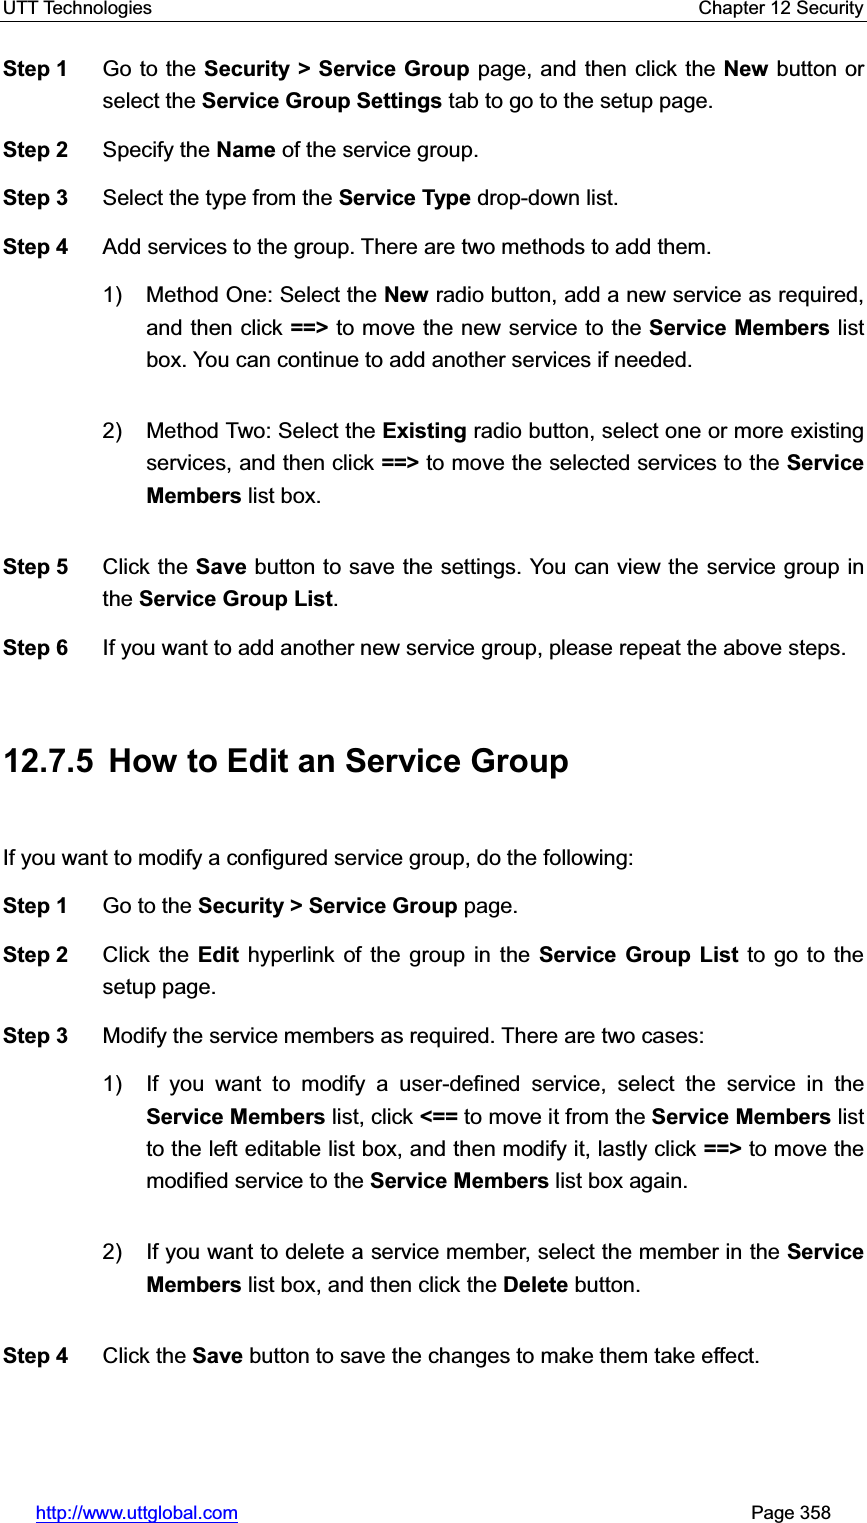 UTT Technologies    Chapter 12 Security   http://www.uttglobal.com                                                       Page 358 Step 1  Go to the Security &gt; Service Group page, and then click the New button or select the Service Group Settings tab to go to the setup page. Step 2  Specify the Name of the service group. Step 3  Select the type from the Service Type drop-down list. Step 4  Add services to the group. There are two methods to add them. 1) Method One: Select the New radio button, add a new service as required, and then click ==&gt; to move the new service to the Service Members list box. You can continue to add another services if needed.   2) Method Two: Select the Existing radio button, select one or more existing services, and then click ==&gt; to move the selected services to the Service Members list box. Step 5  Click the Save button to save the settings. You can view the service group in the Service Group List.Step 6  If you want to add another new service group, please repeat the above steps. 12.7.5  How to Edit an Service Group If you want to modify a configured service group, do the following:   Step 1  Go to the Security &gt; Service Group page. Step 2  Click the Edit hyperlink of the group in the Service Group List to go to the setup page. Step 3  Modify the service members as required. There are two cases:   1)  If you want to modify a user-defined service, select the service in theService Members list, click &lt;== to move it from the Service Members list to the left editable list box, and then modify it, lastly click ==&gt; to move the modified service to the Service Members list box again. 2)  If you want to delete a service member, select the member in the Service Members list box, and then click the Delete button.   Step 4  Click the Save button to save the changes to make them take effect. 